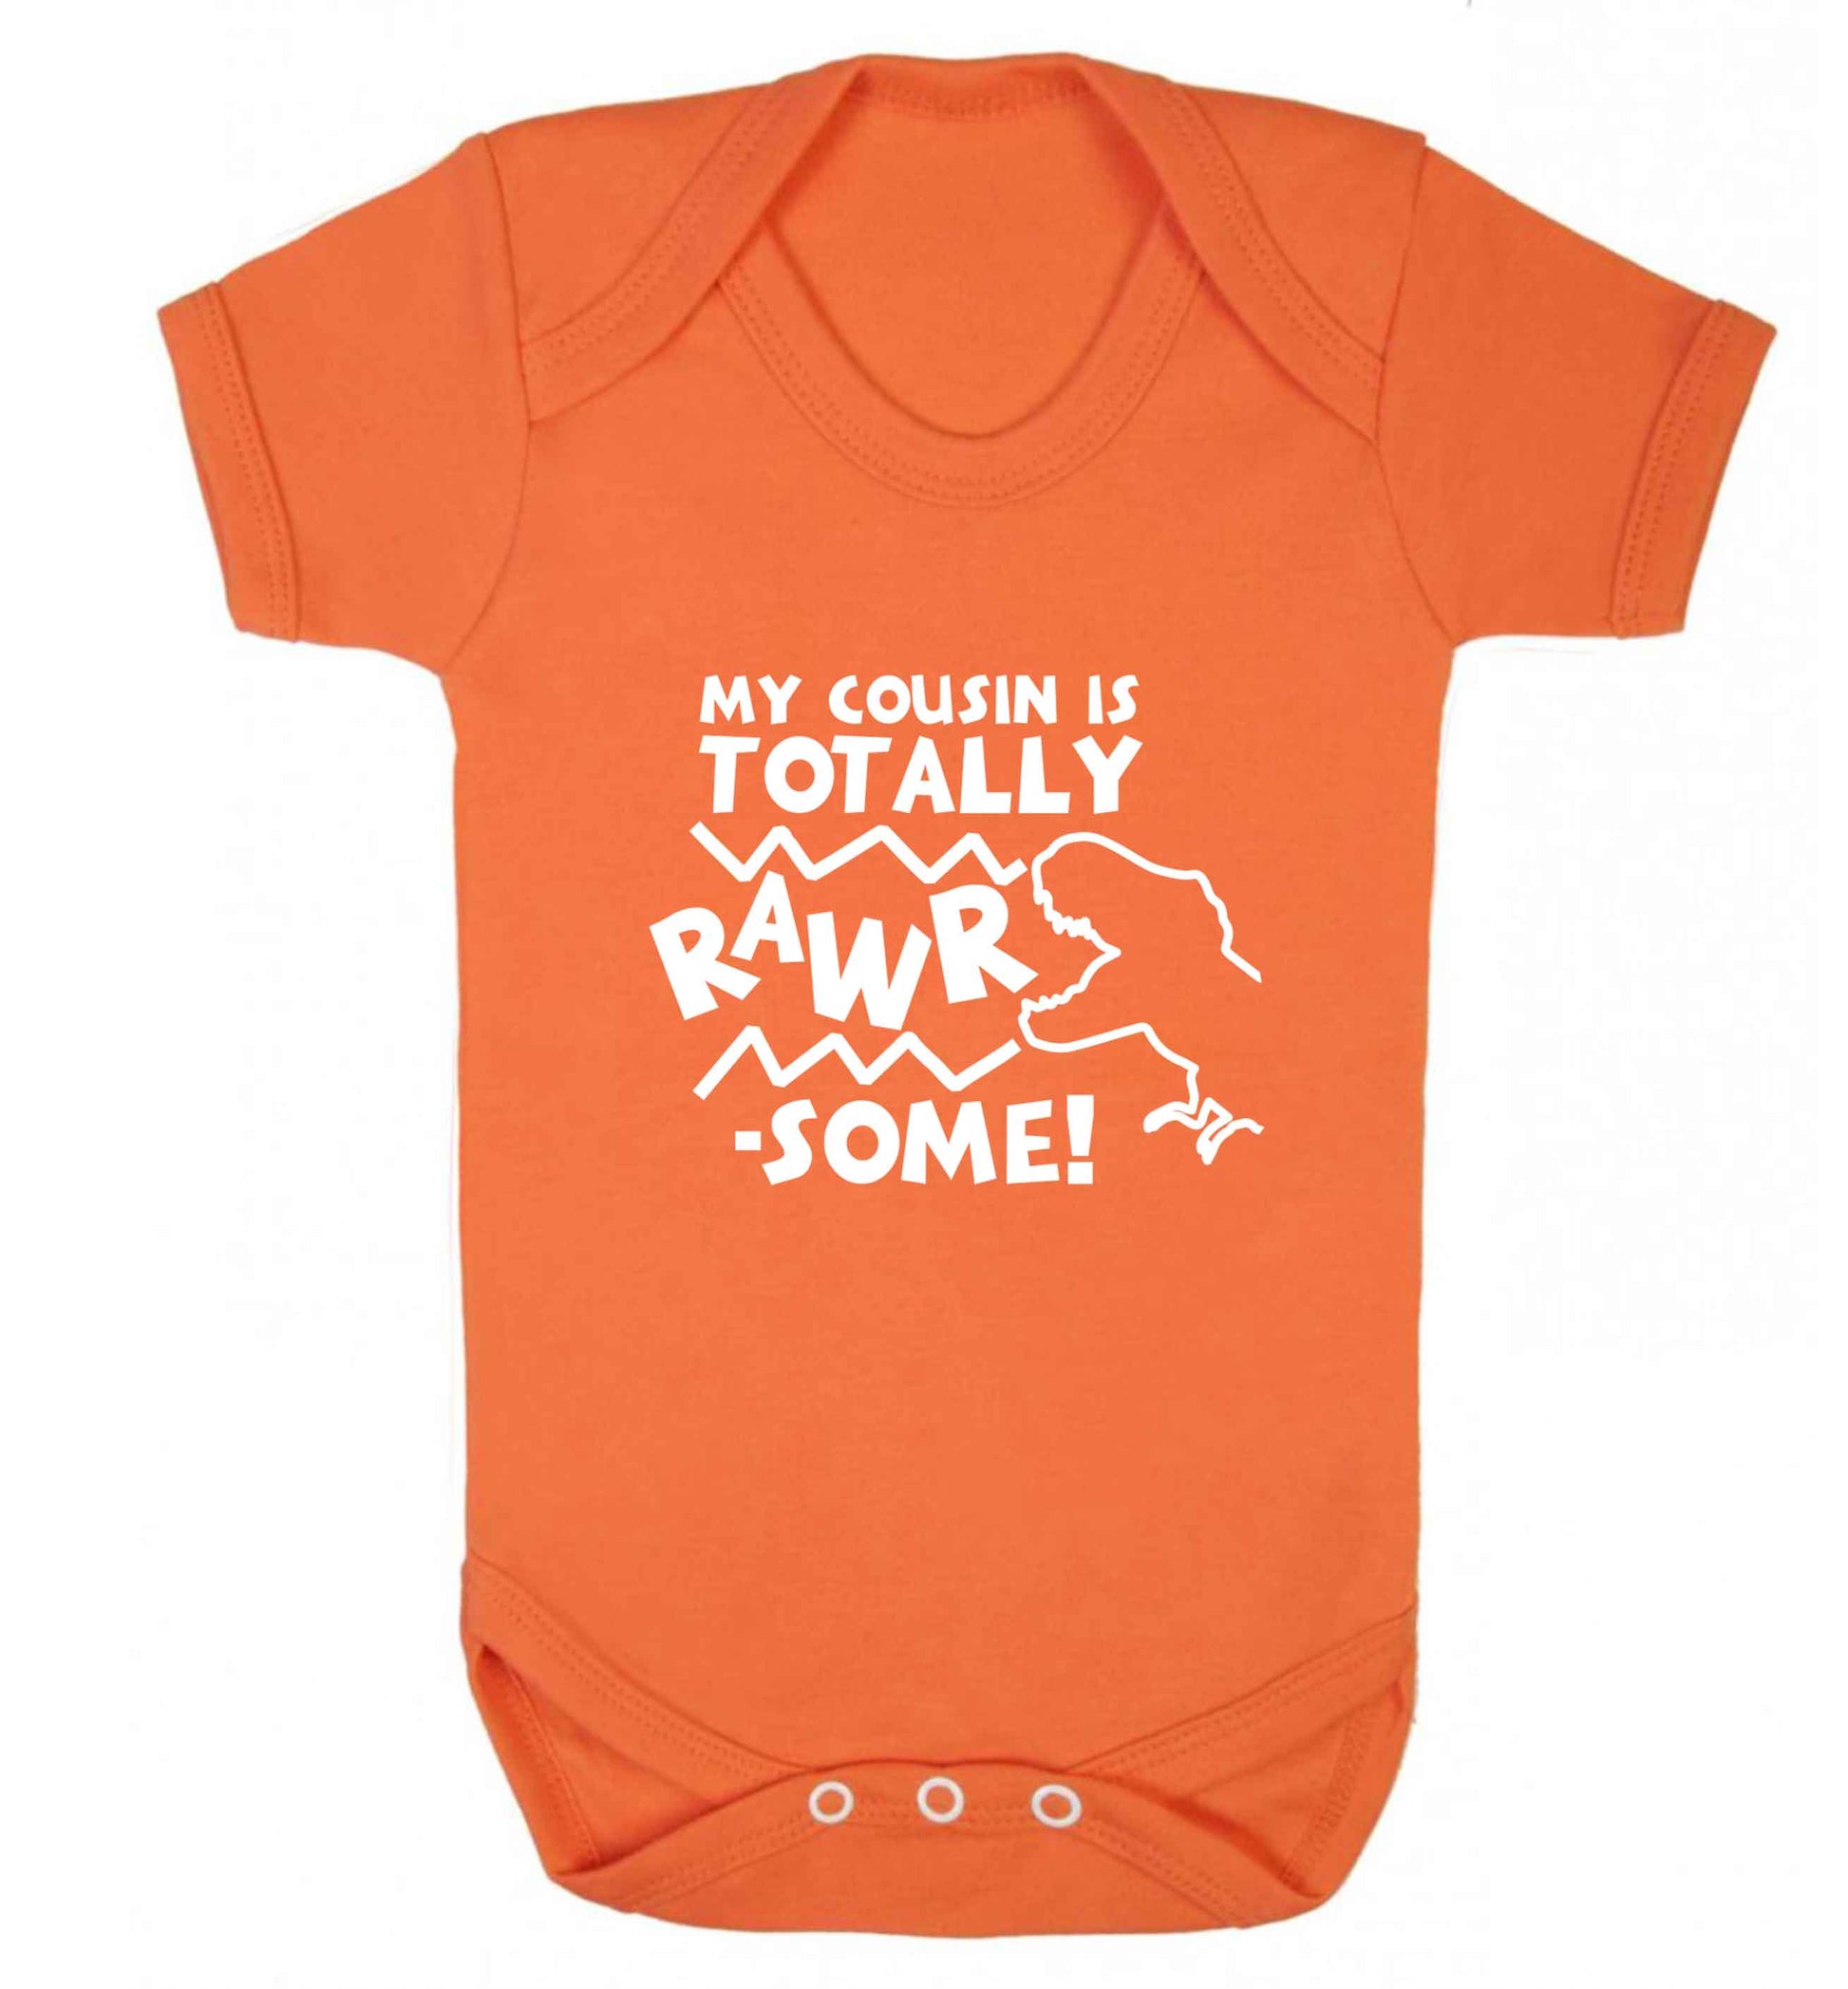 My cousin is totally rawrsome baby vest orange 18-24 months